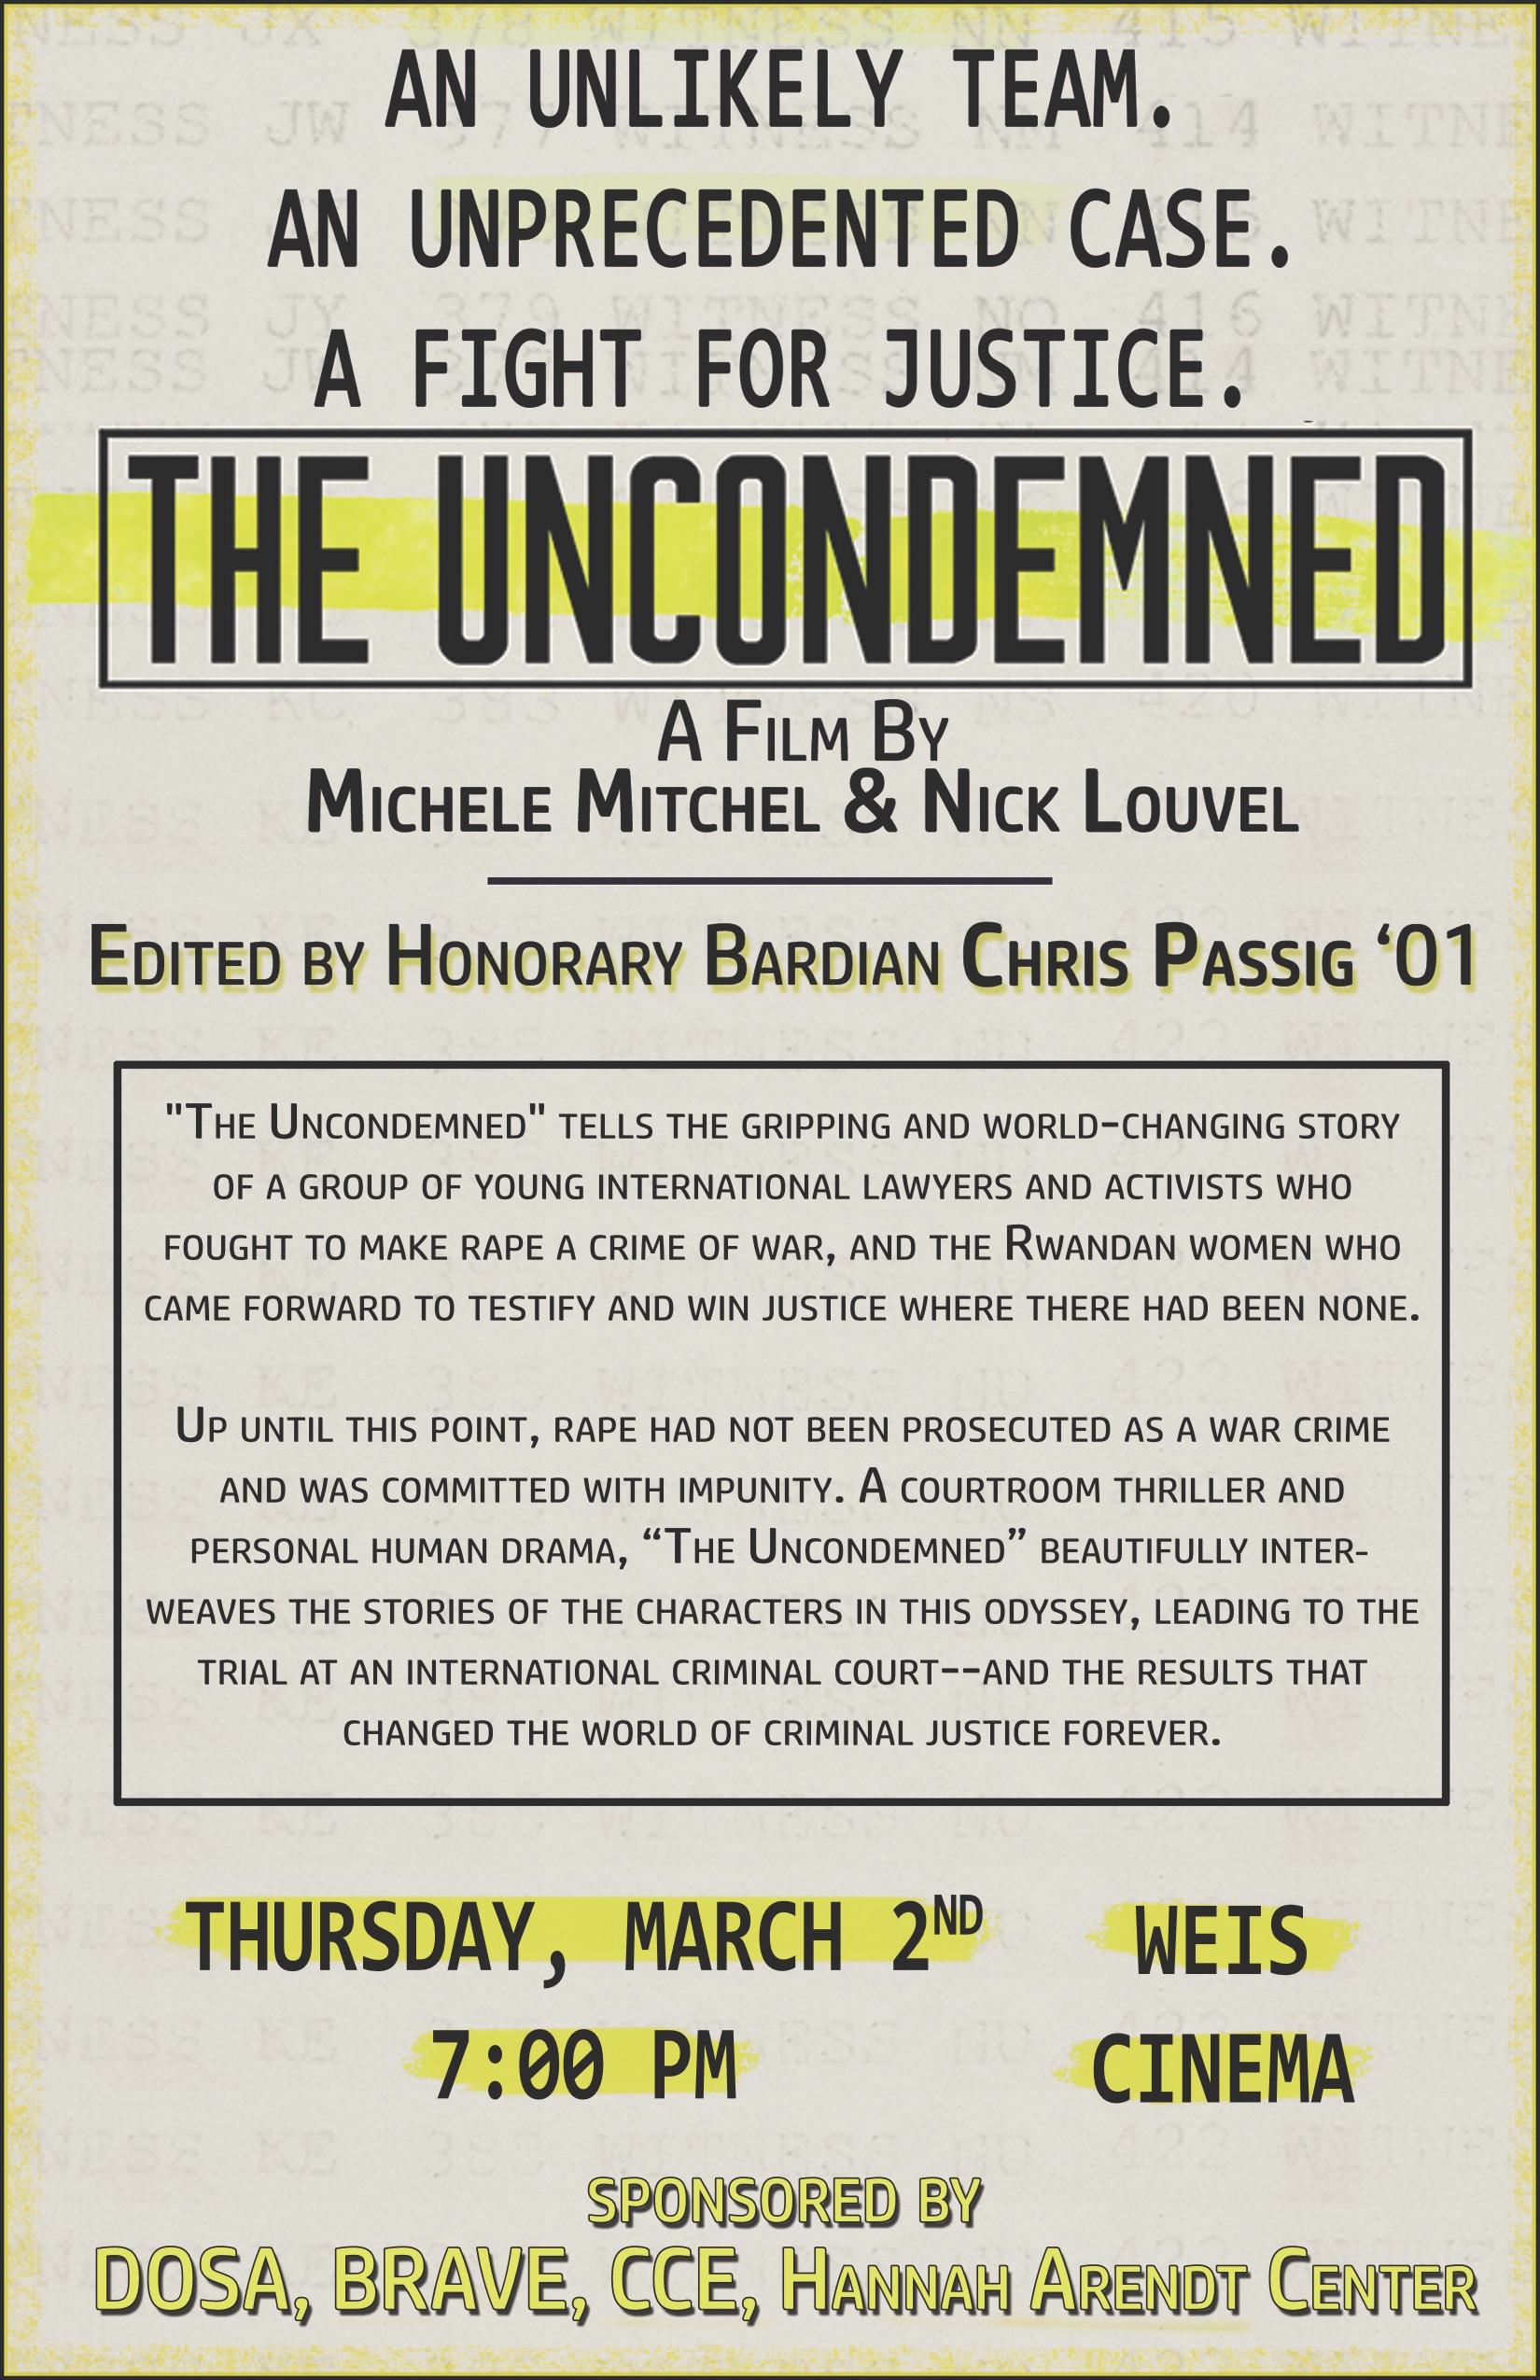 Film: "The Uncondemned" by Michele Mitchell and Nick Louvel. Edited by Honorary Bardian Chris Passig '01